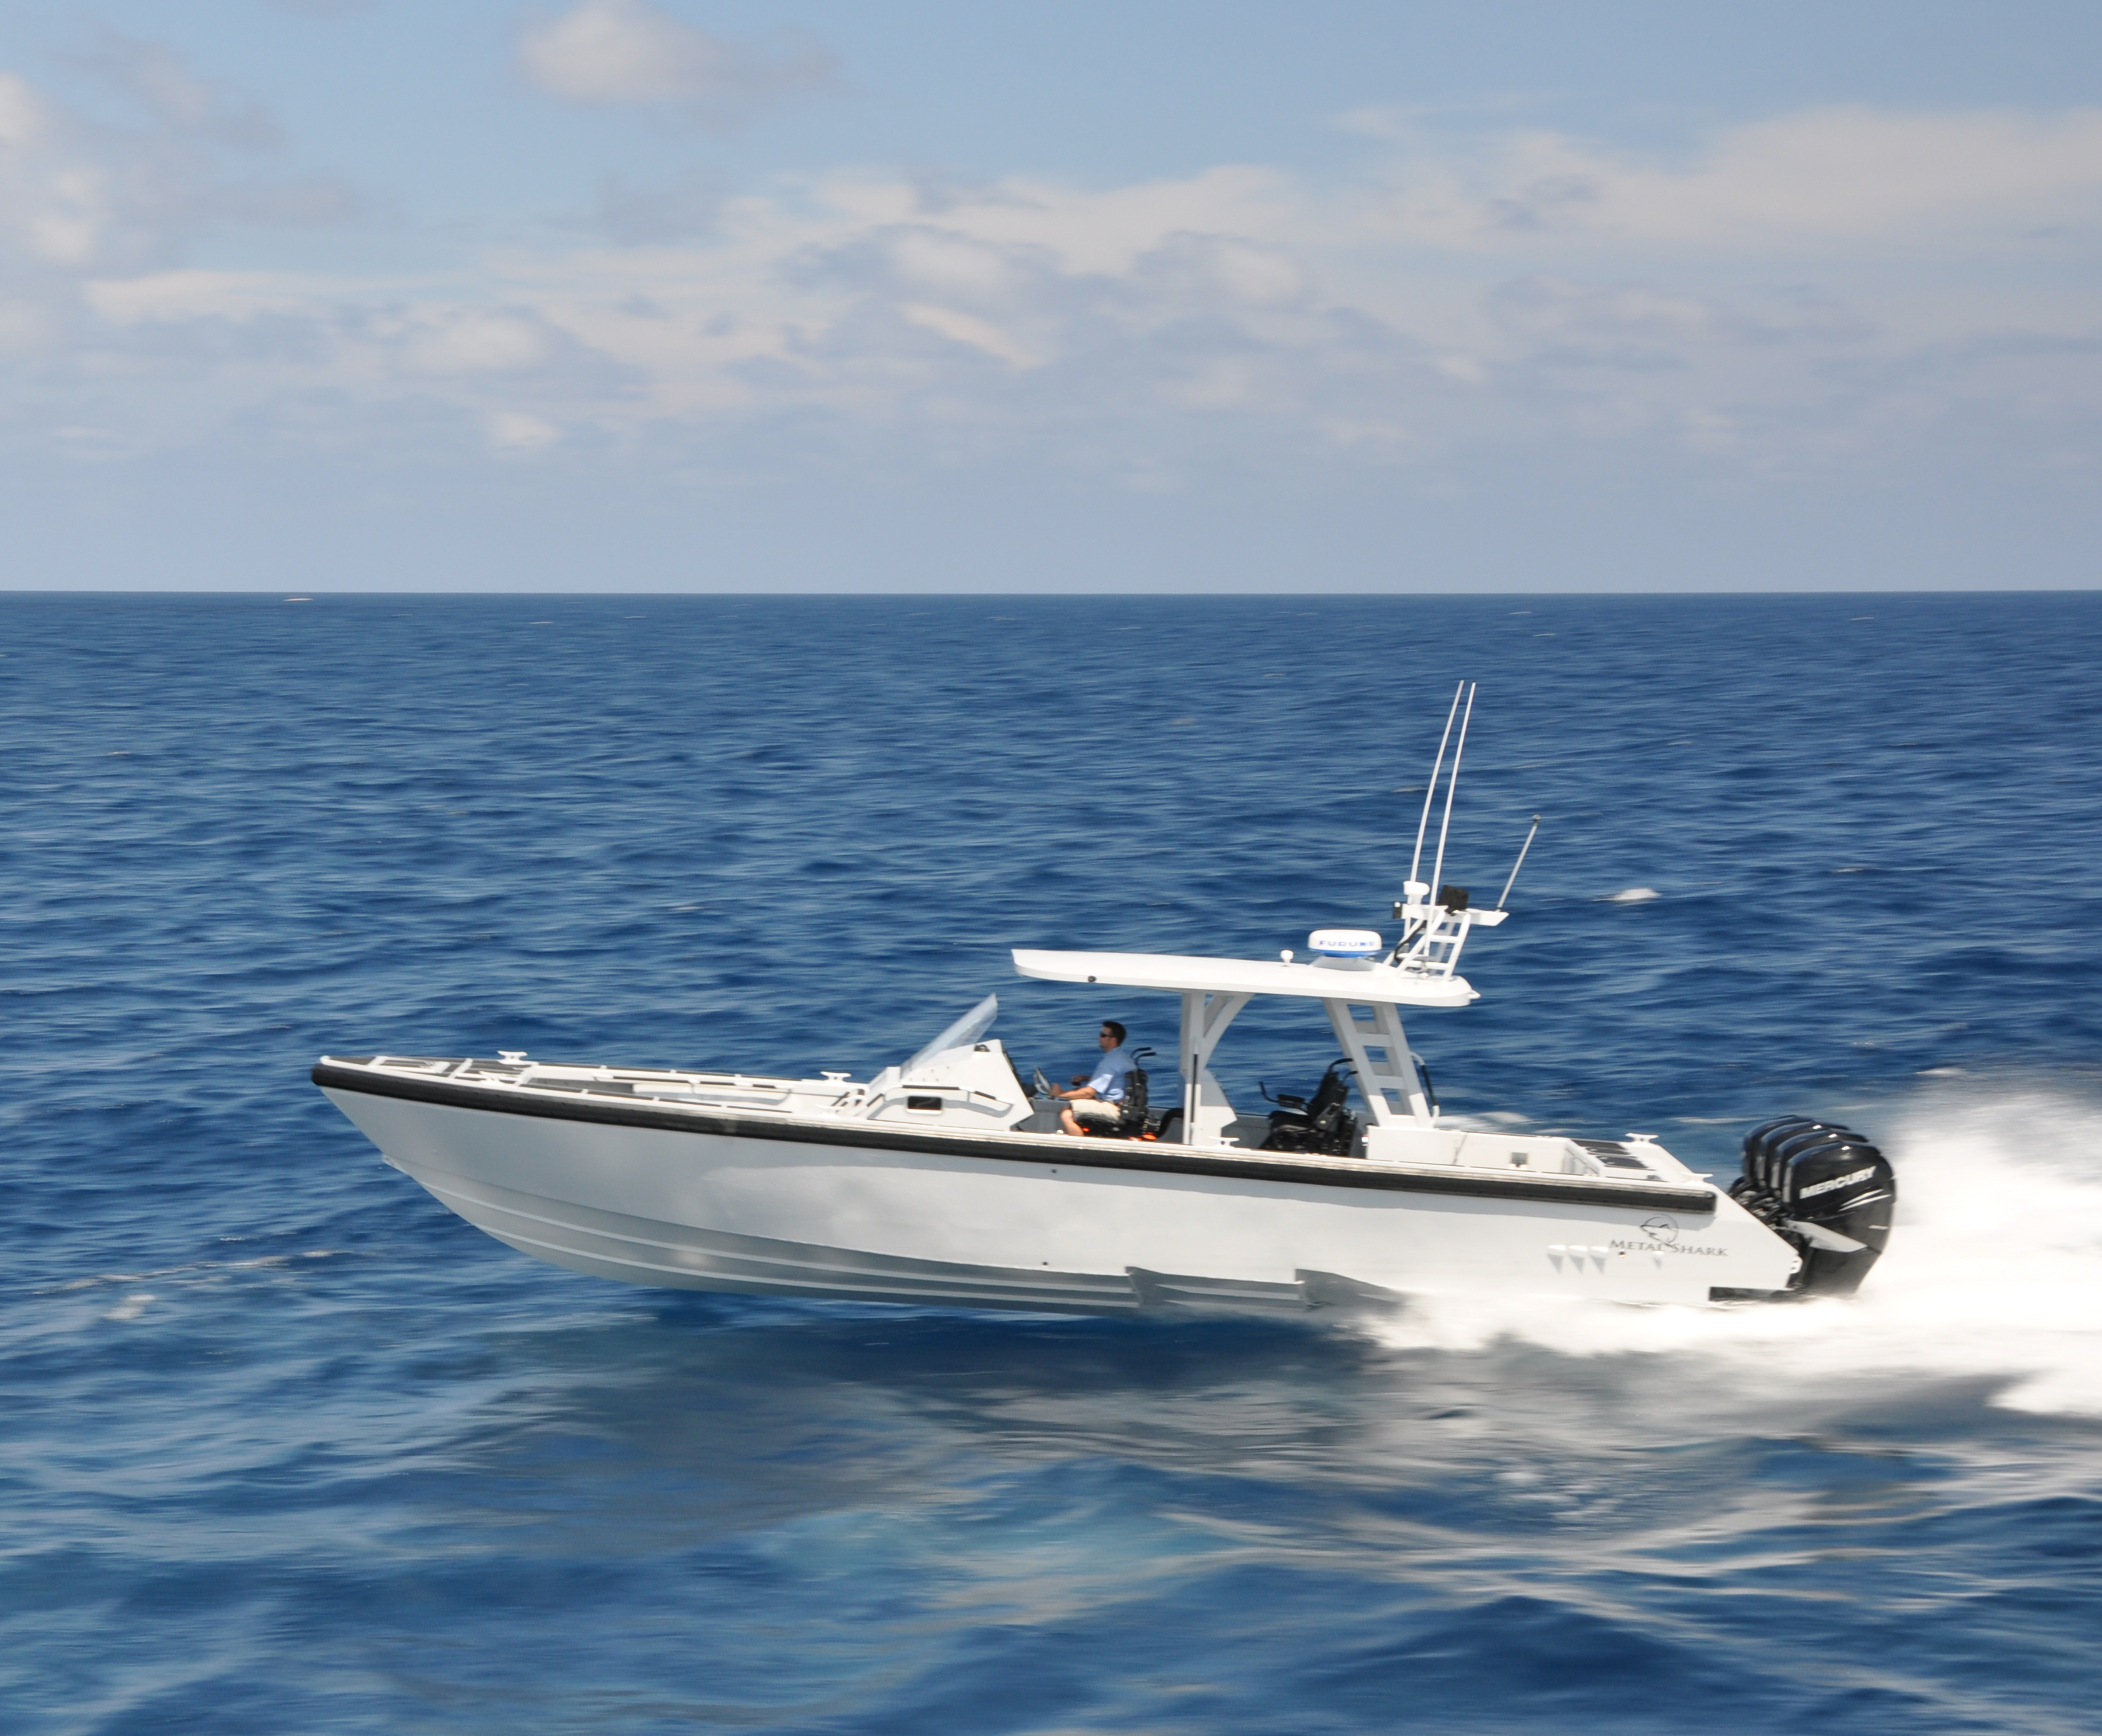 Metal Shark Introduces Aluminum 25' Bay Boat and Announces New